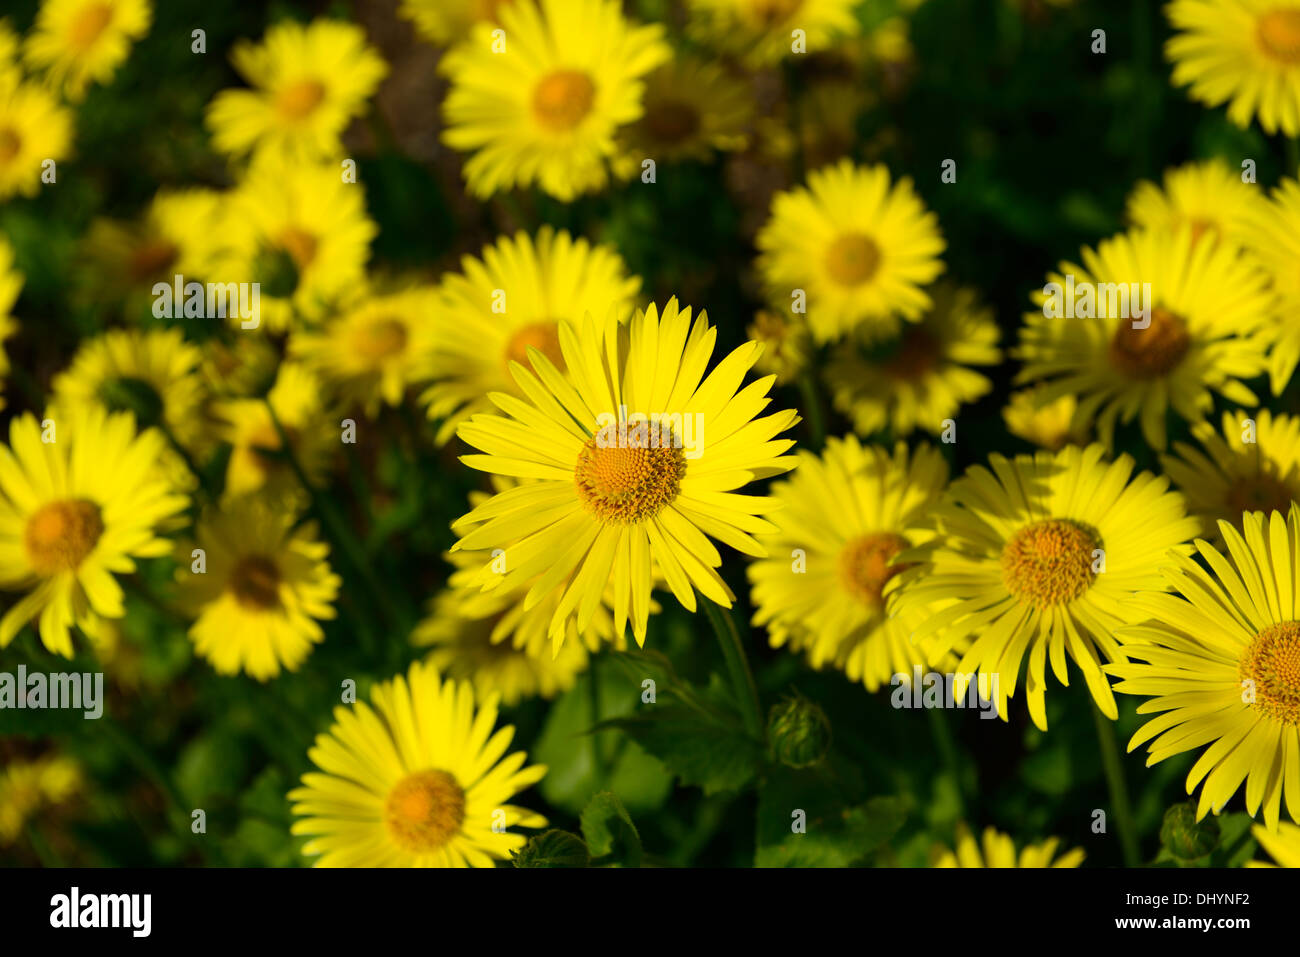 Doronicum plantagineum Doronic plantain yellow daisy flowers flowering bloom blooming early spring Stock Photo